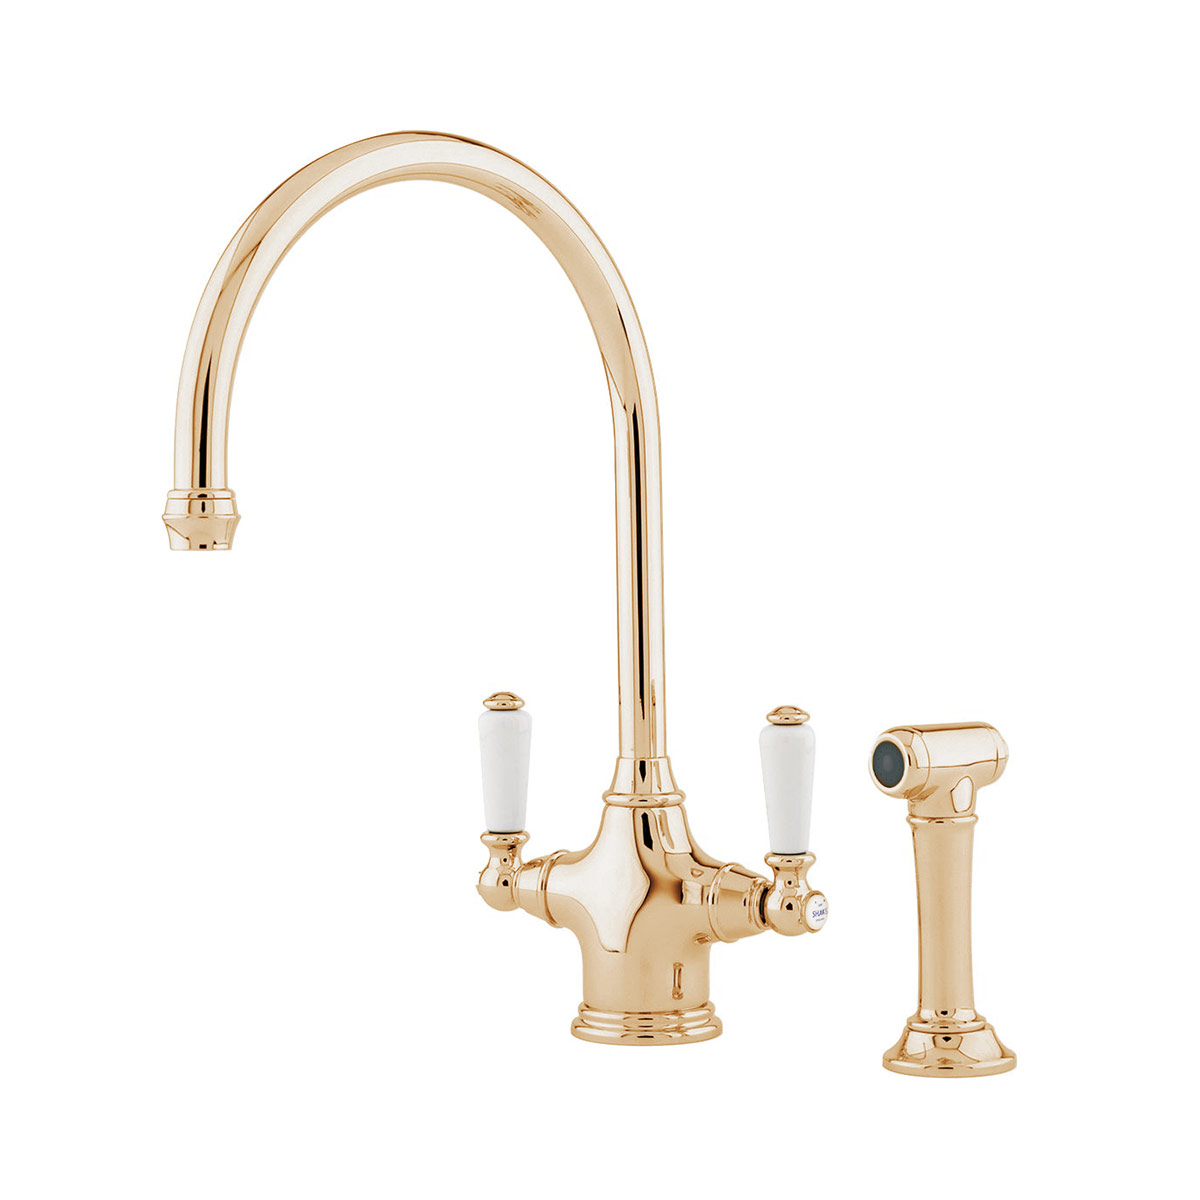 Shaws by Perrin & Rowe Ribble kitchen mixer with spray rinse in Polished Brass. Phoenician style monobloc kitchen tap AUSH.4360. Distributed in Australia by Luxe by Design, Brisbane.